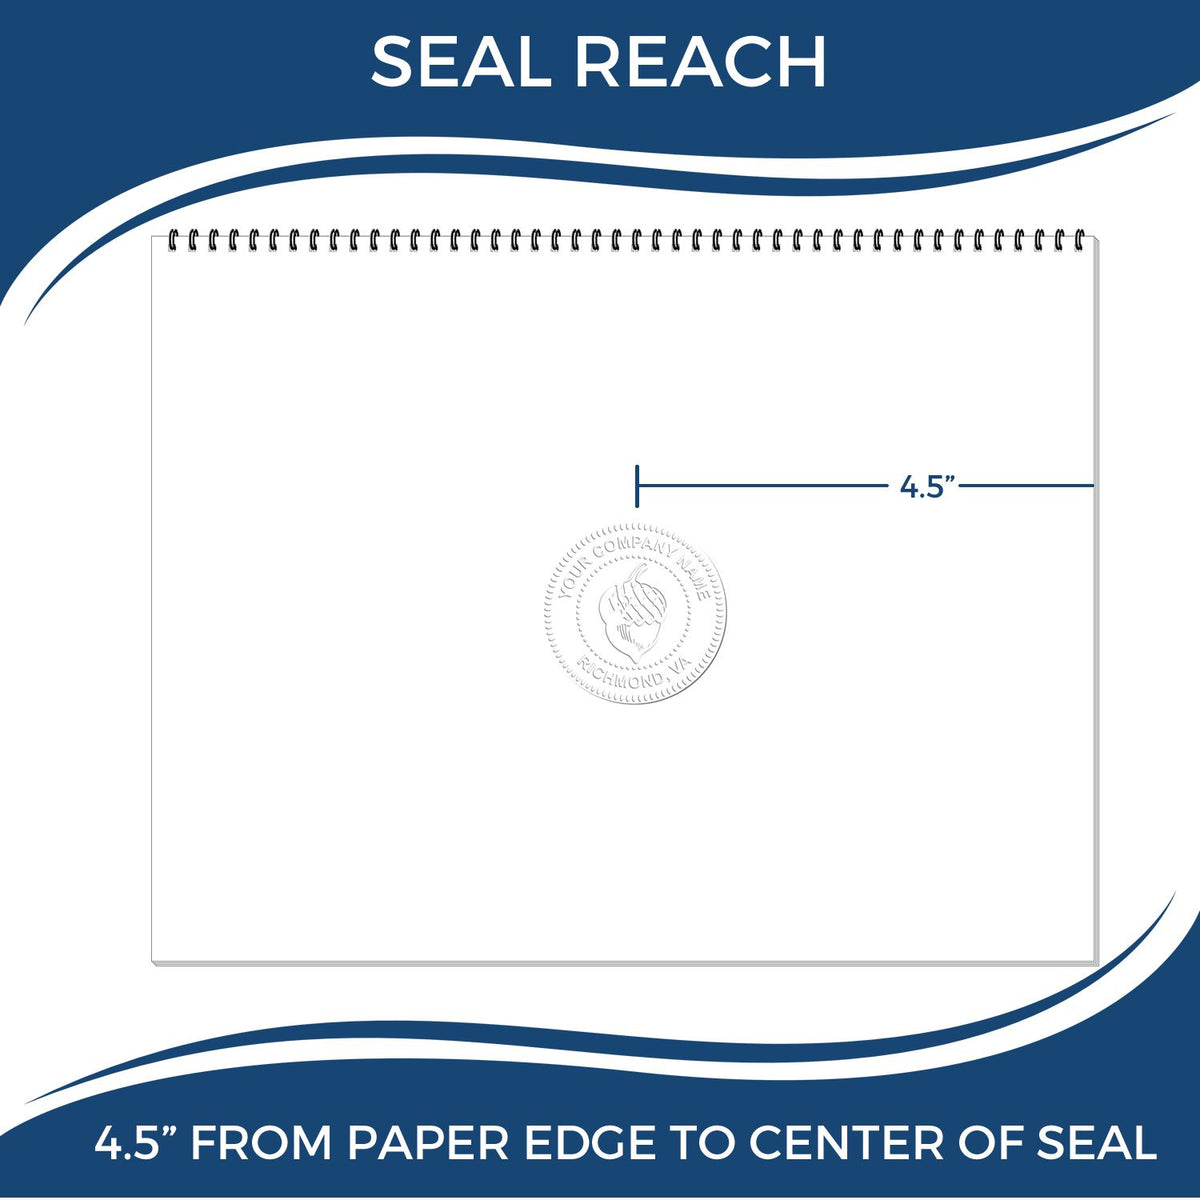 An infographic showing the seal reach which is represented by a ruler and a miniature seal image of the State of Tennessee Extended Long Reach Engineer Seal